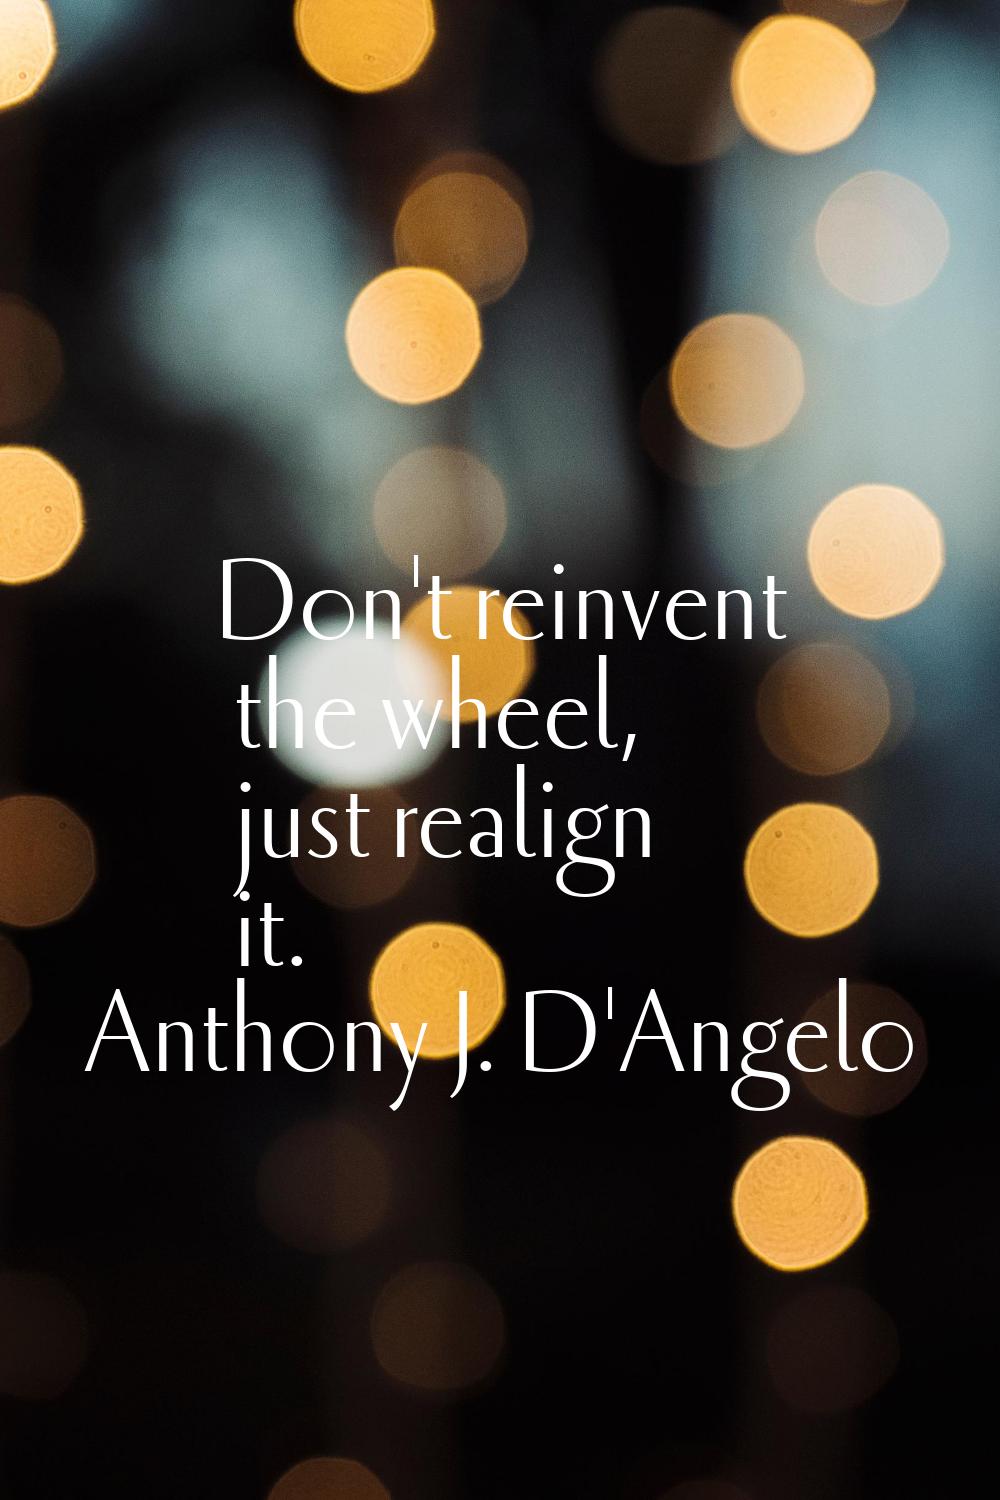 Don't reinvent the wheel, just realign it.